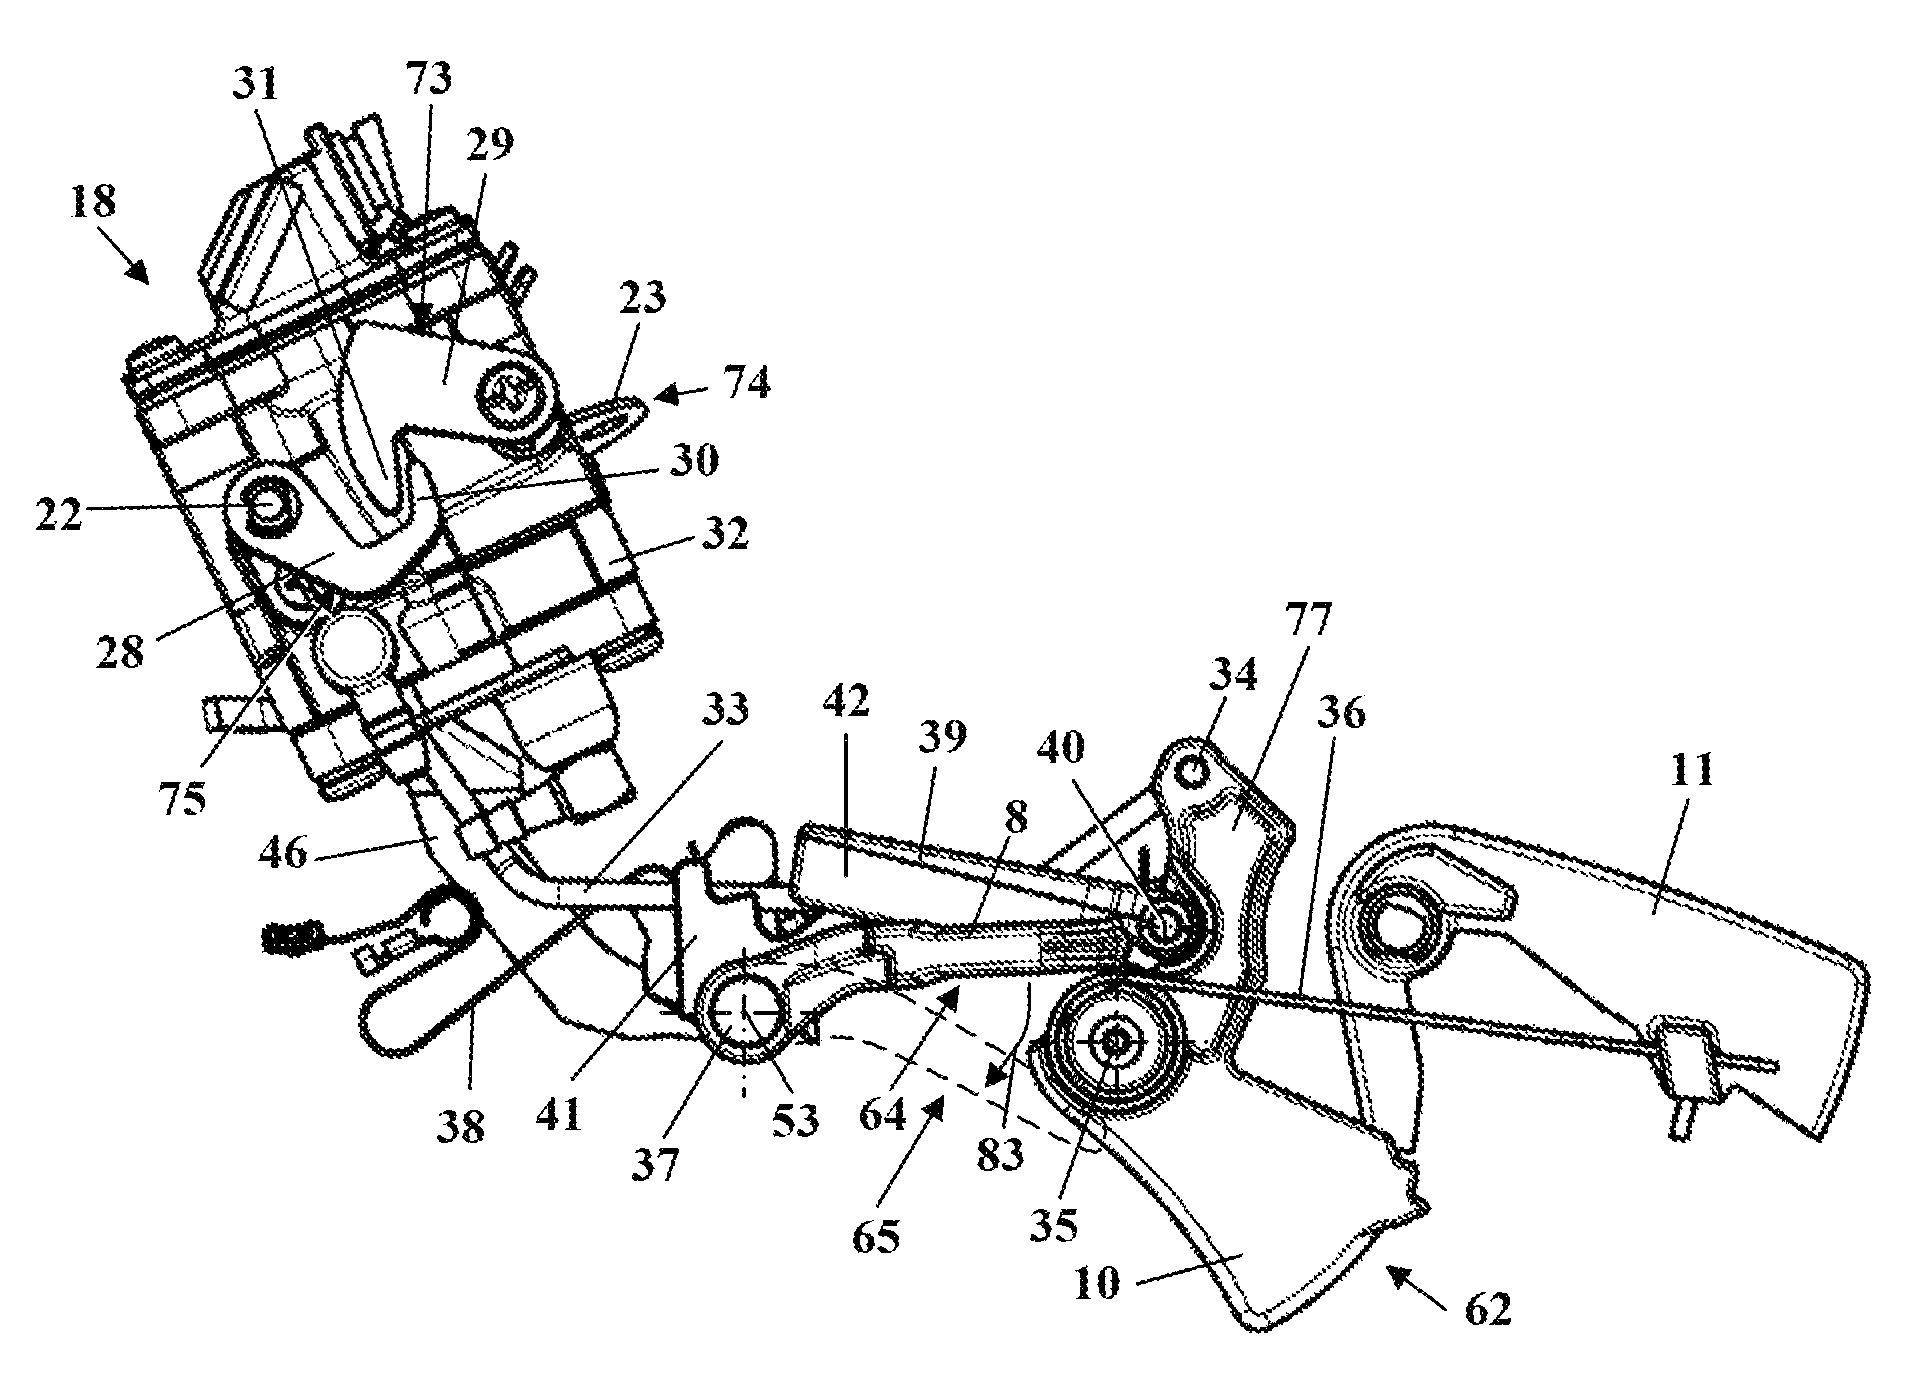 Hand-held power tool with an internal combustion engine